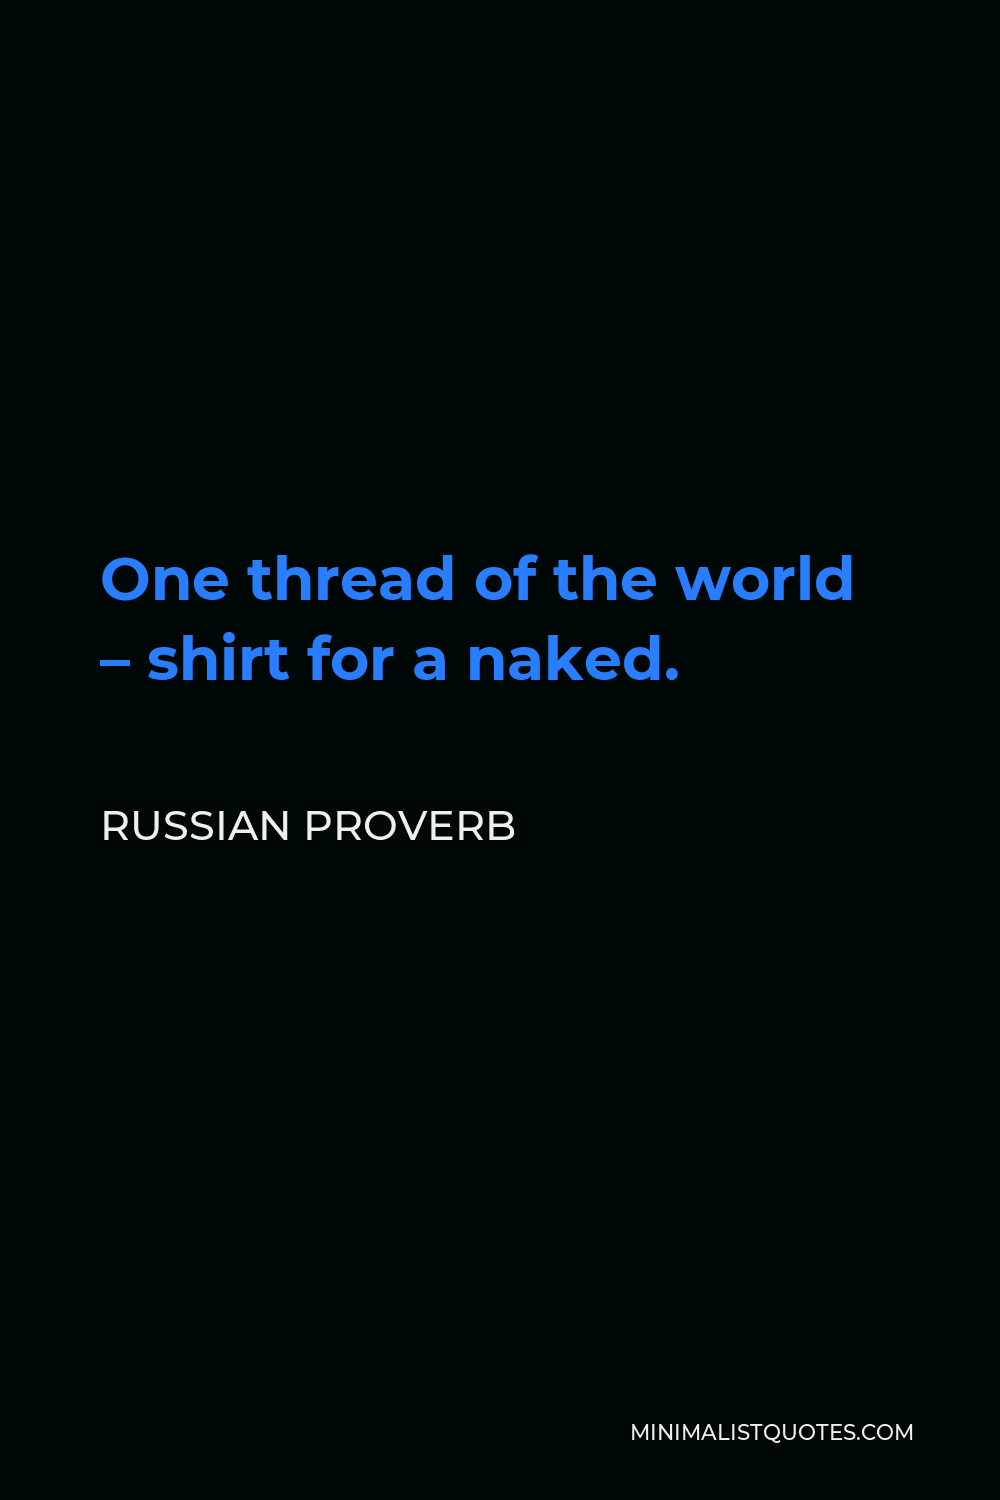 Russian Proverb Quote - One thread of the world – shirt for a naked.